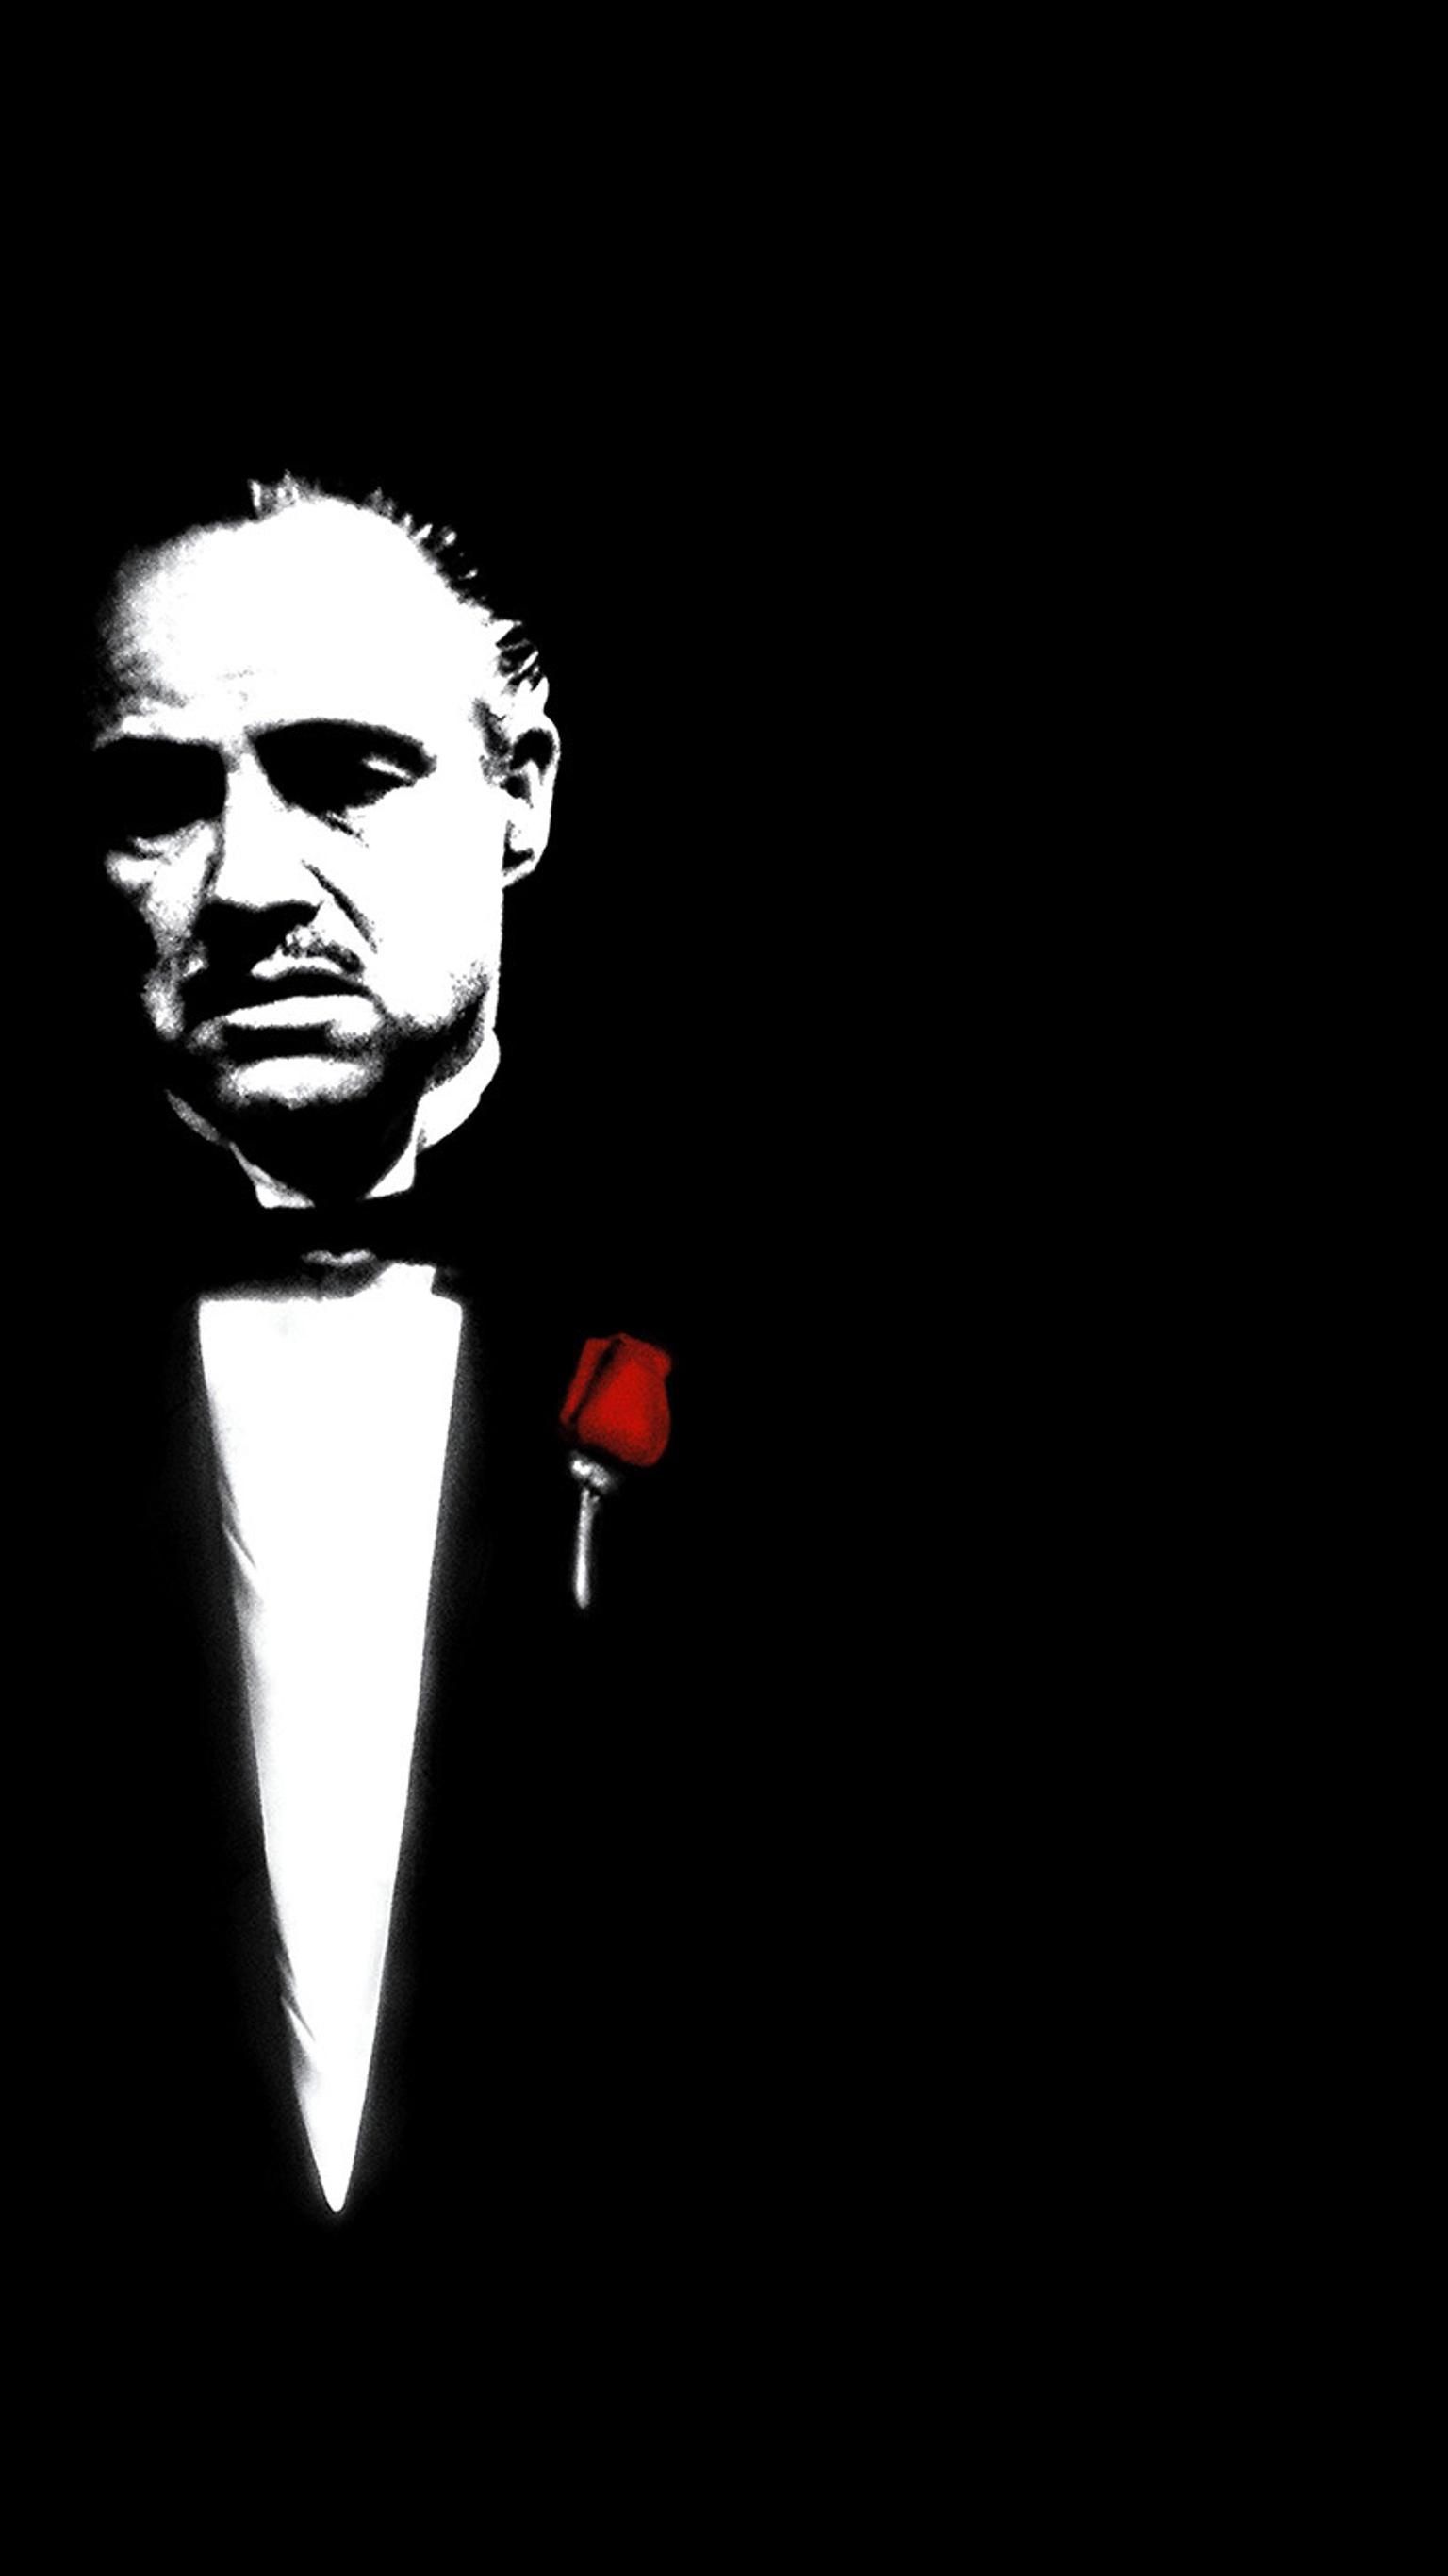 The Godfather (1972) Phone Wallpaper. Moviemania. The godfather wallpaper, The godfather, The godfather poster